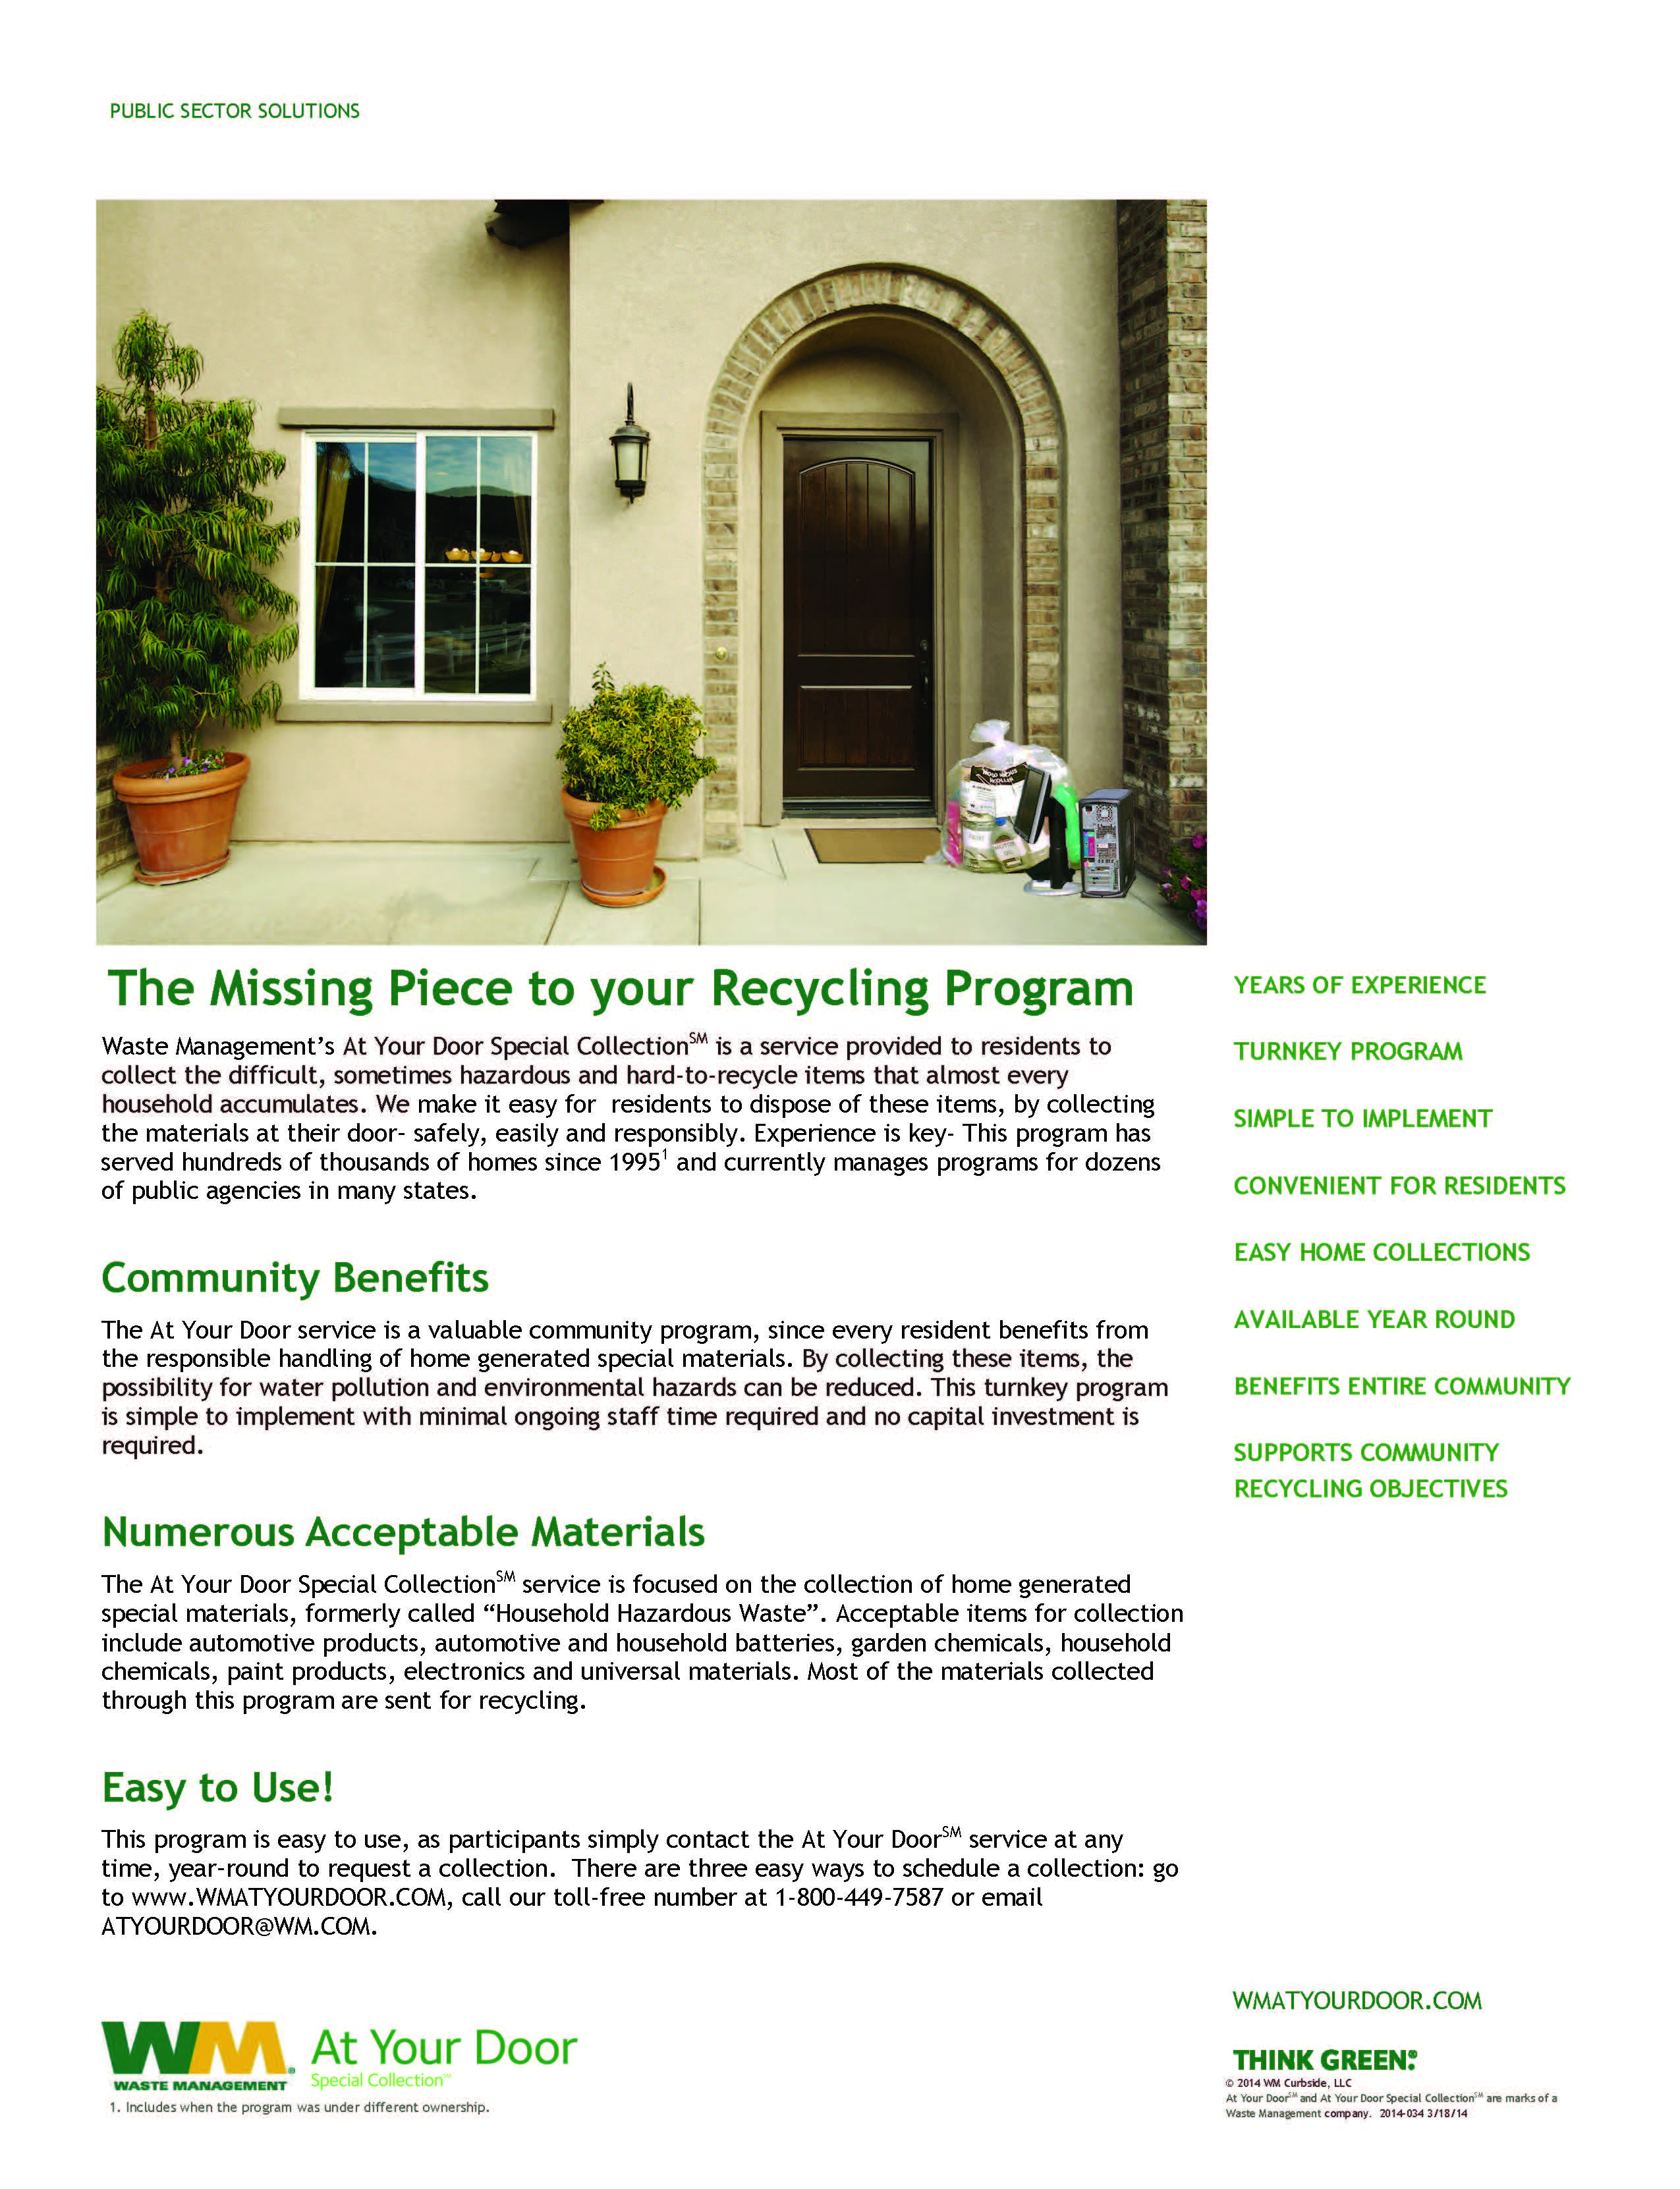 At Your Door 1 page handout 2014-034